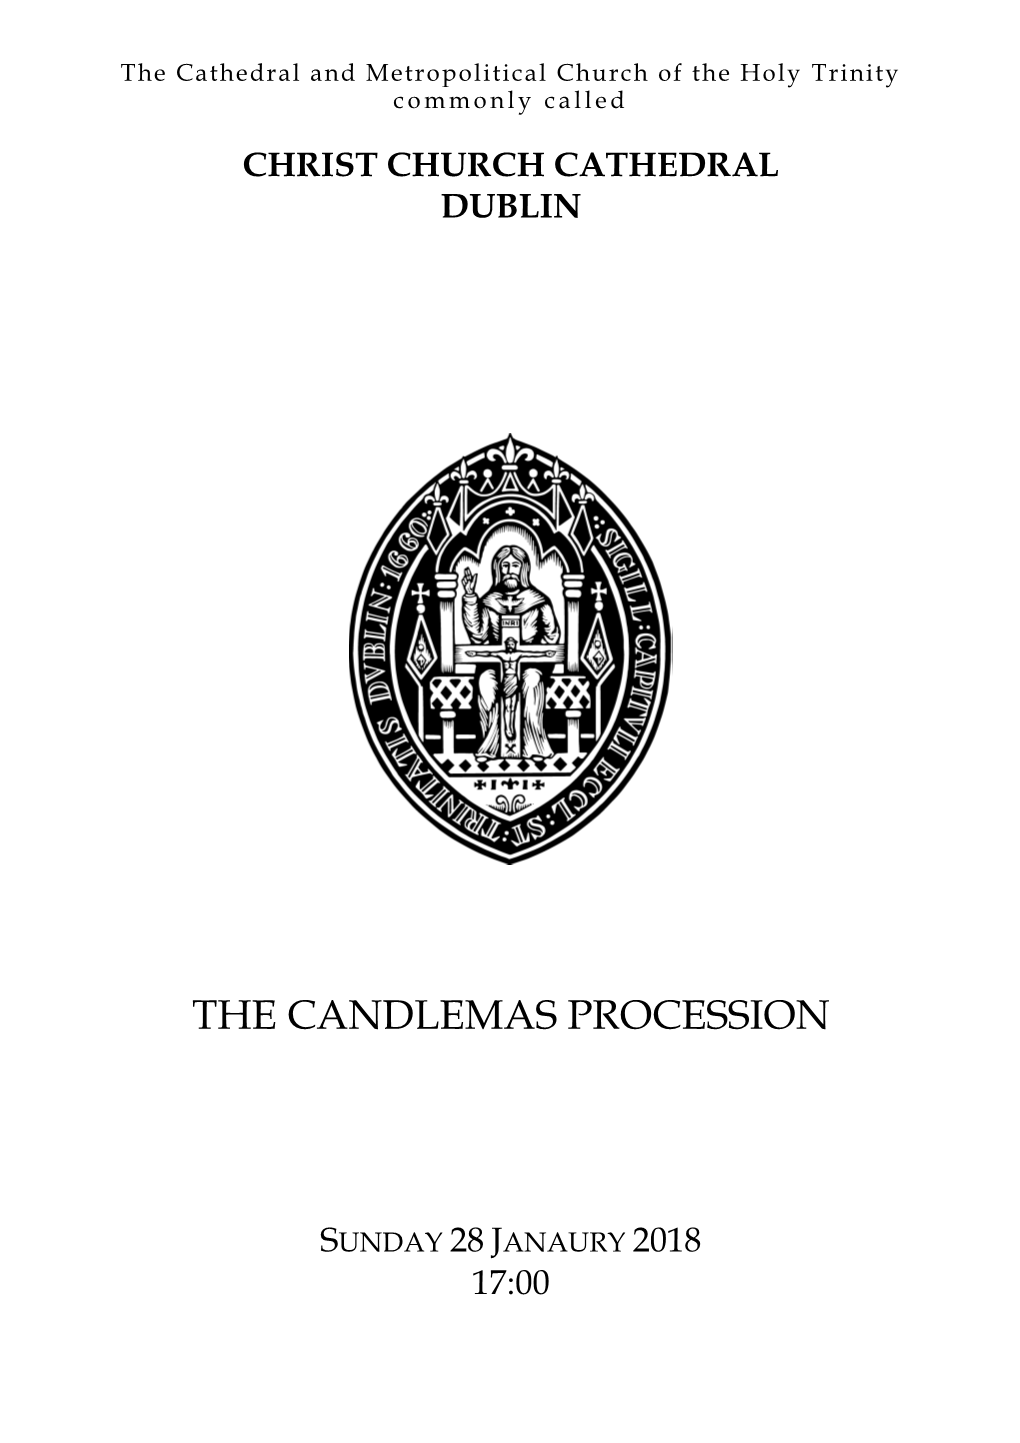 The Candlemas Procession